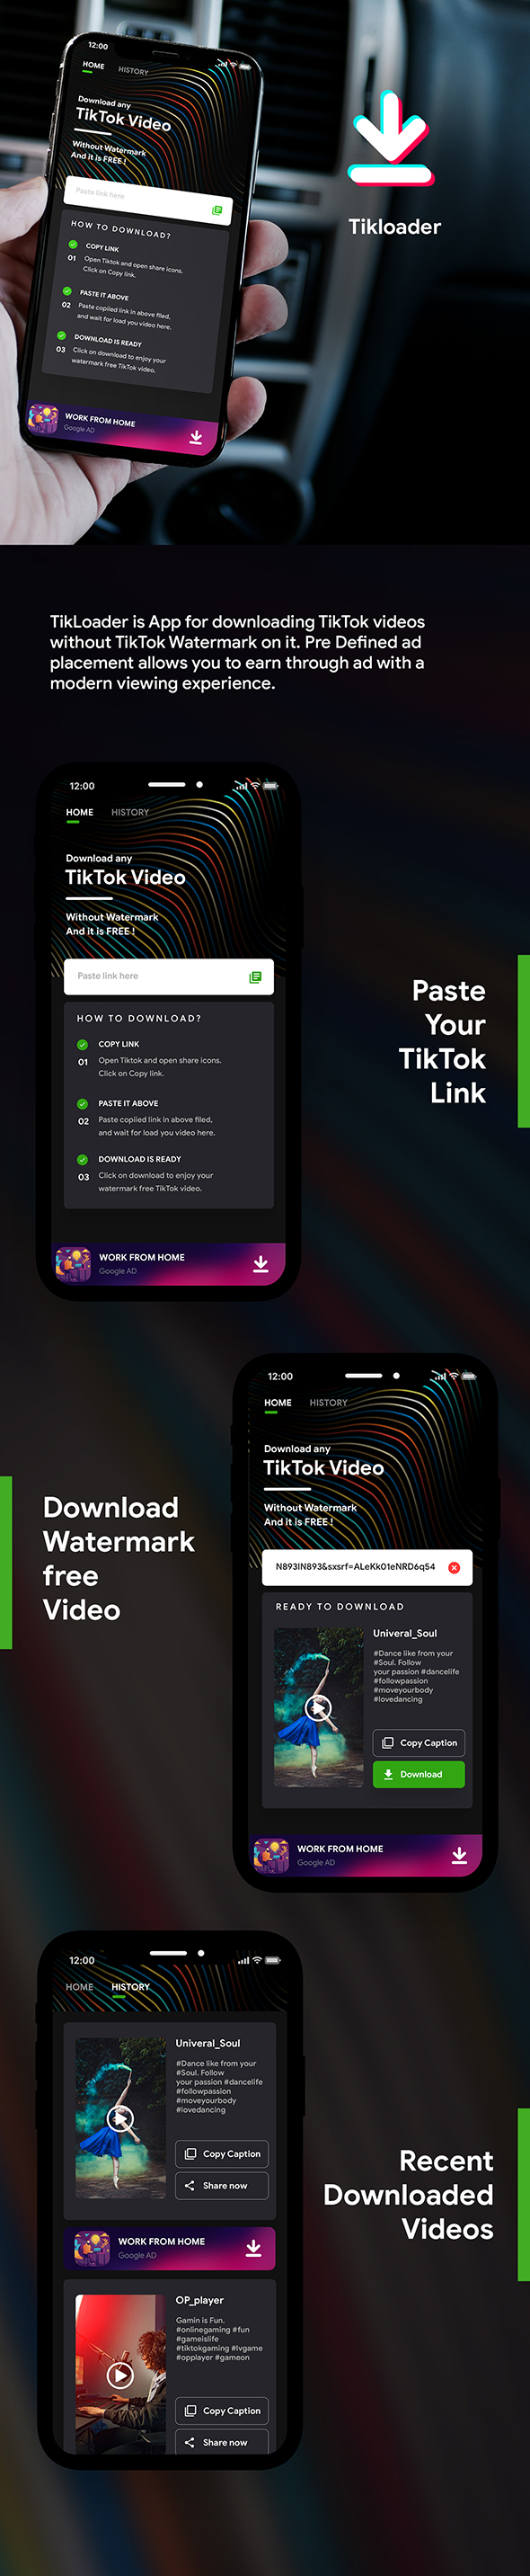 TikTok Video Downloader Android App without Watermark with admob | Tikloader | Complete App - 2